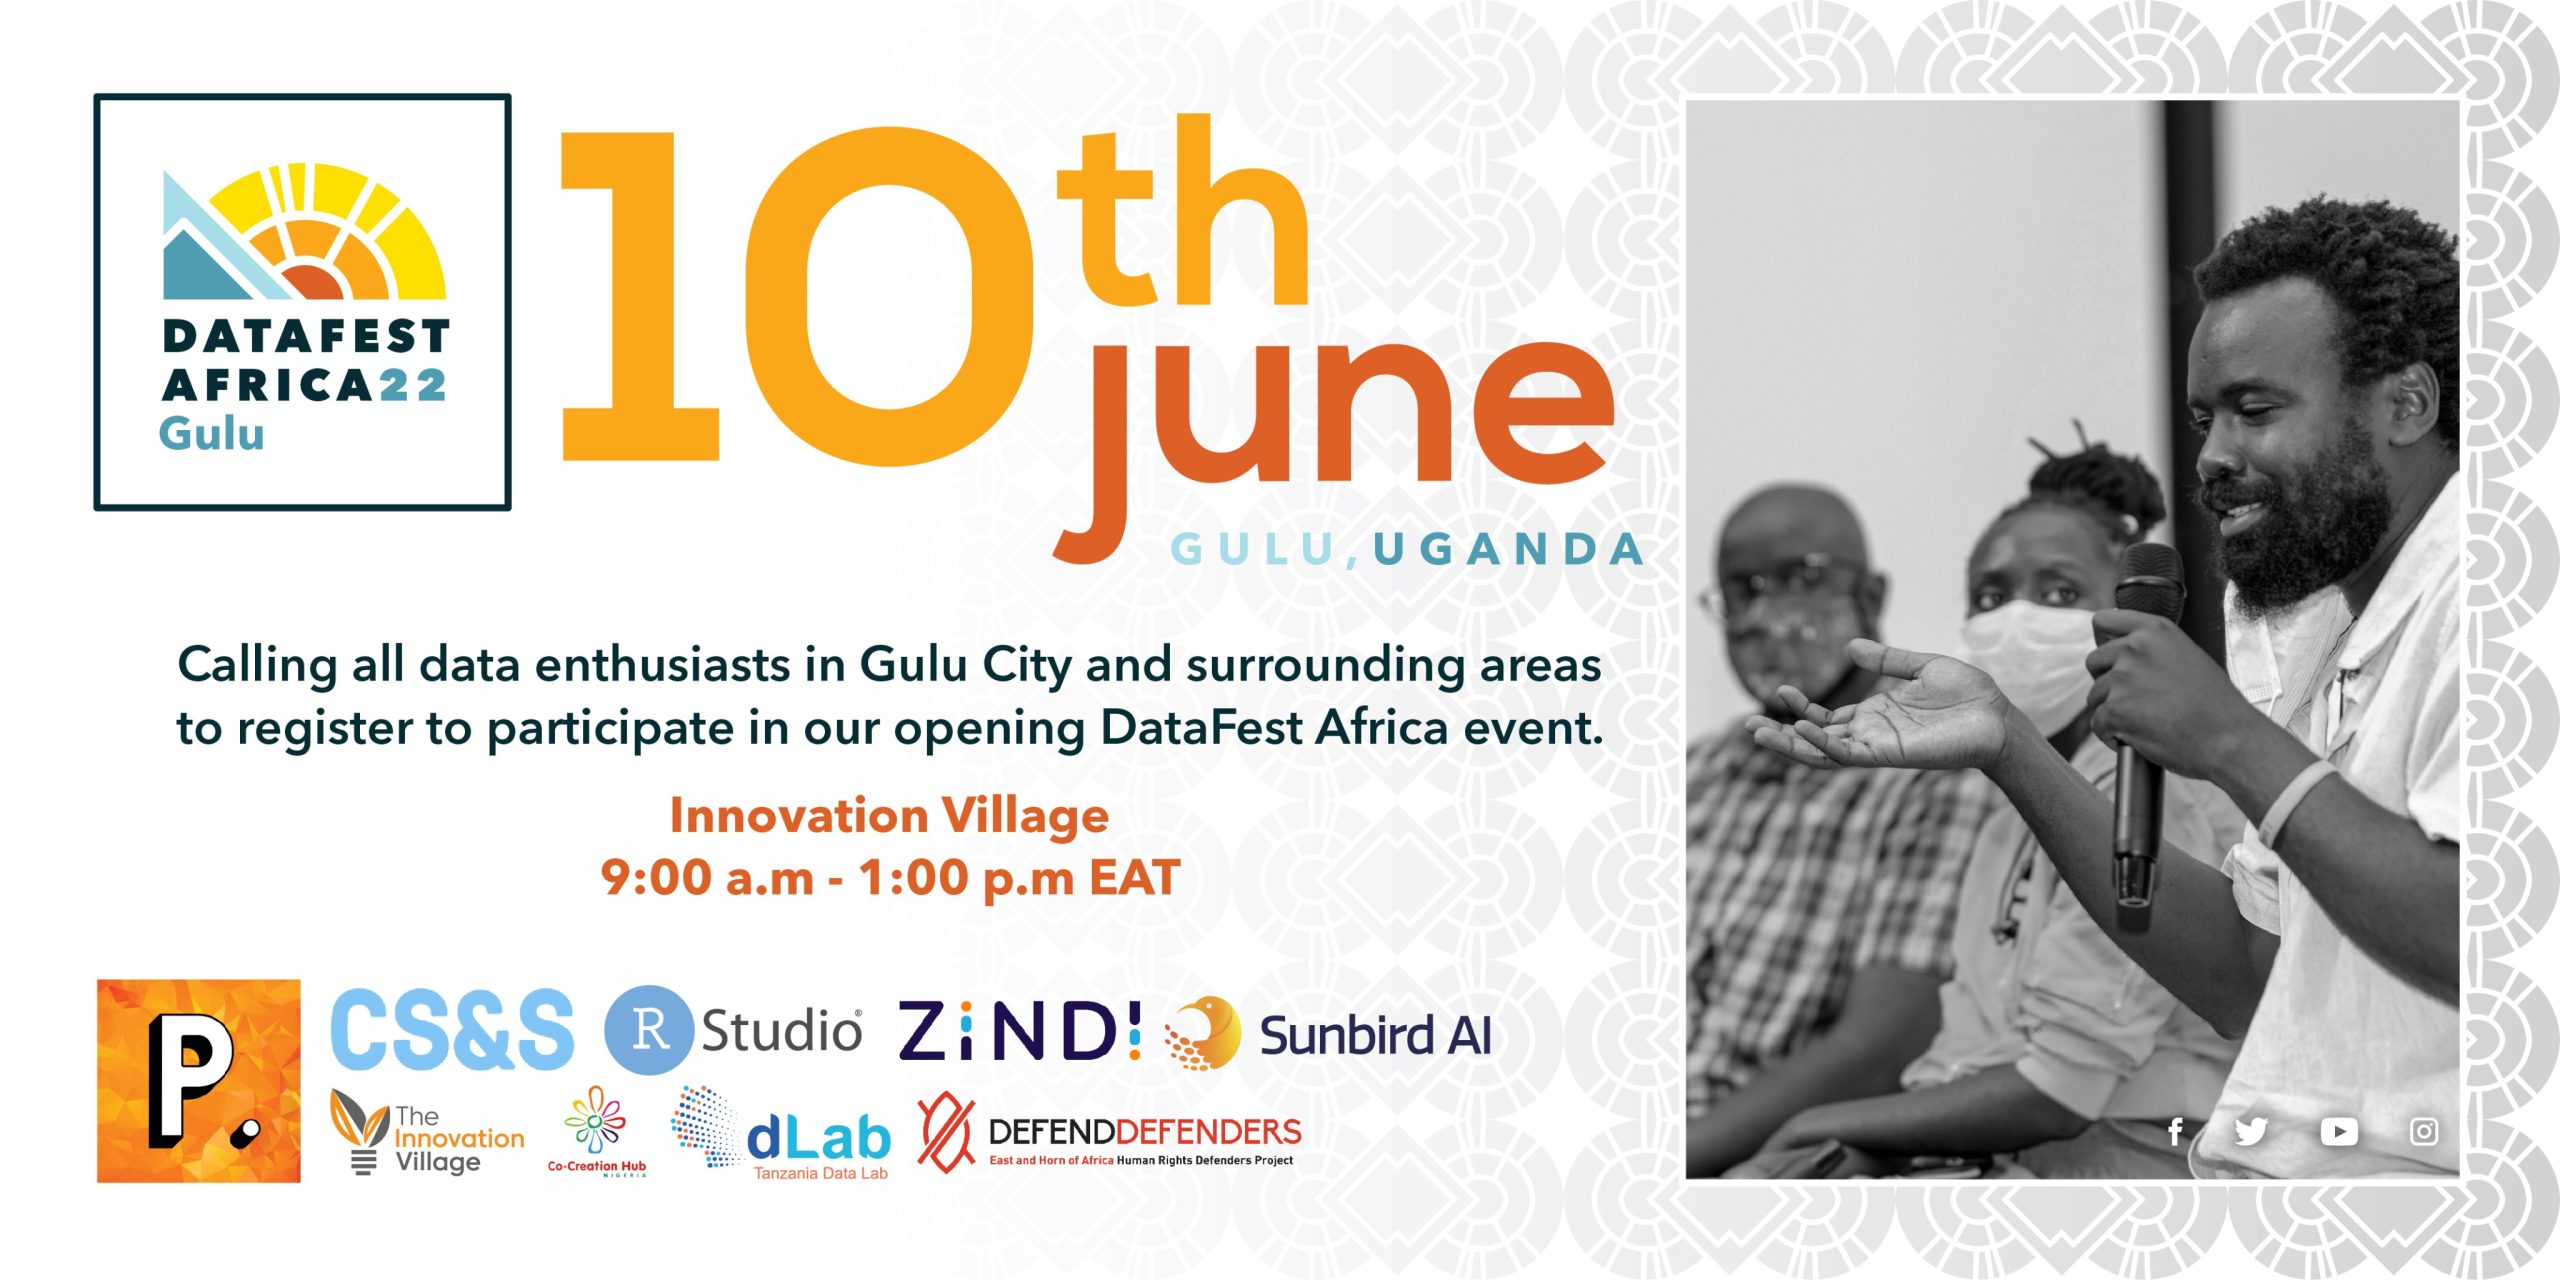 POLLICY on 10th June hosted a DataFest Africa pre-event in Gulu City, Uganda